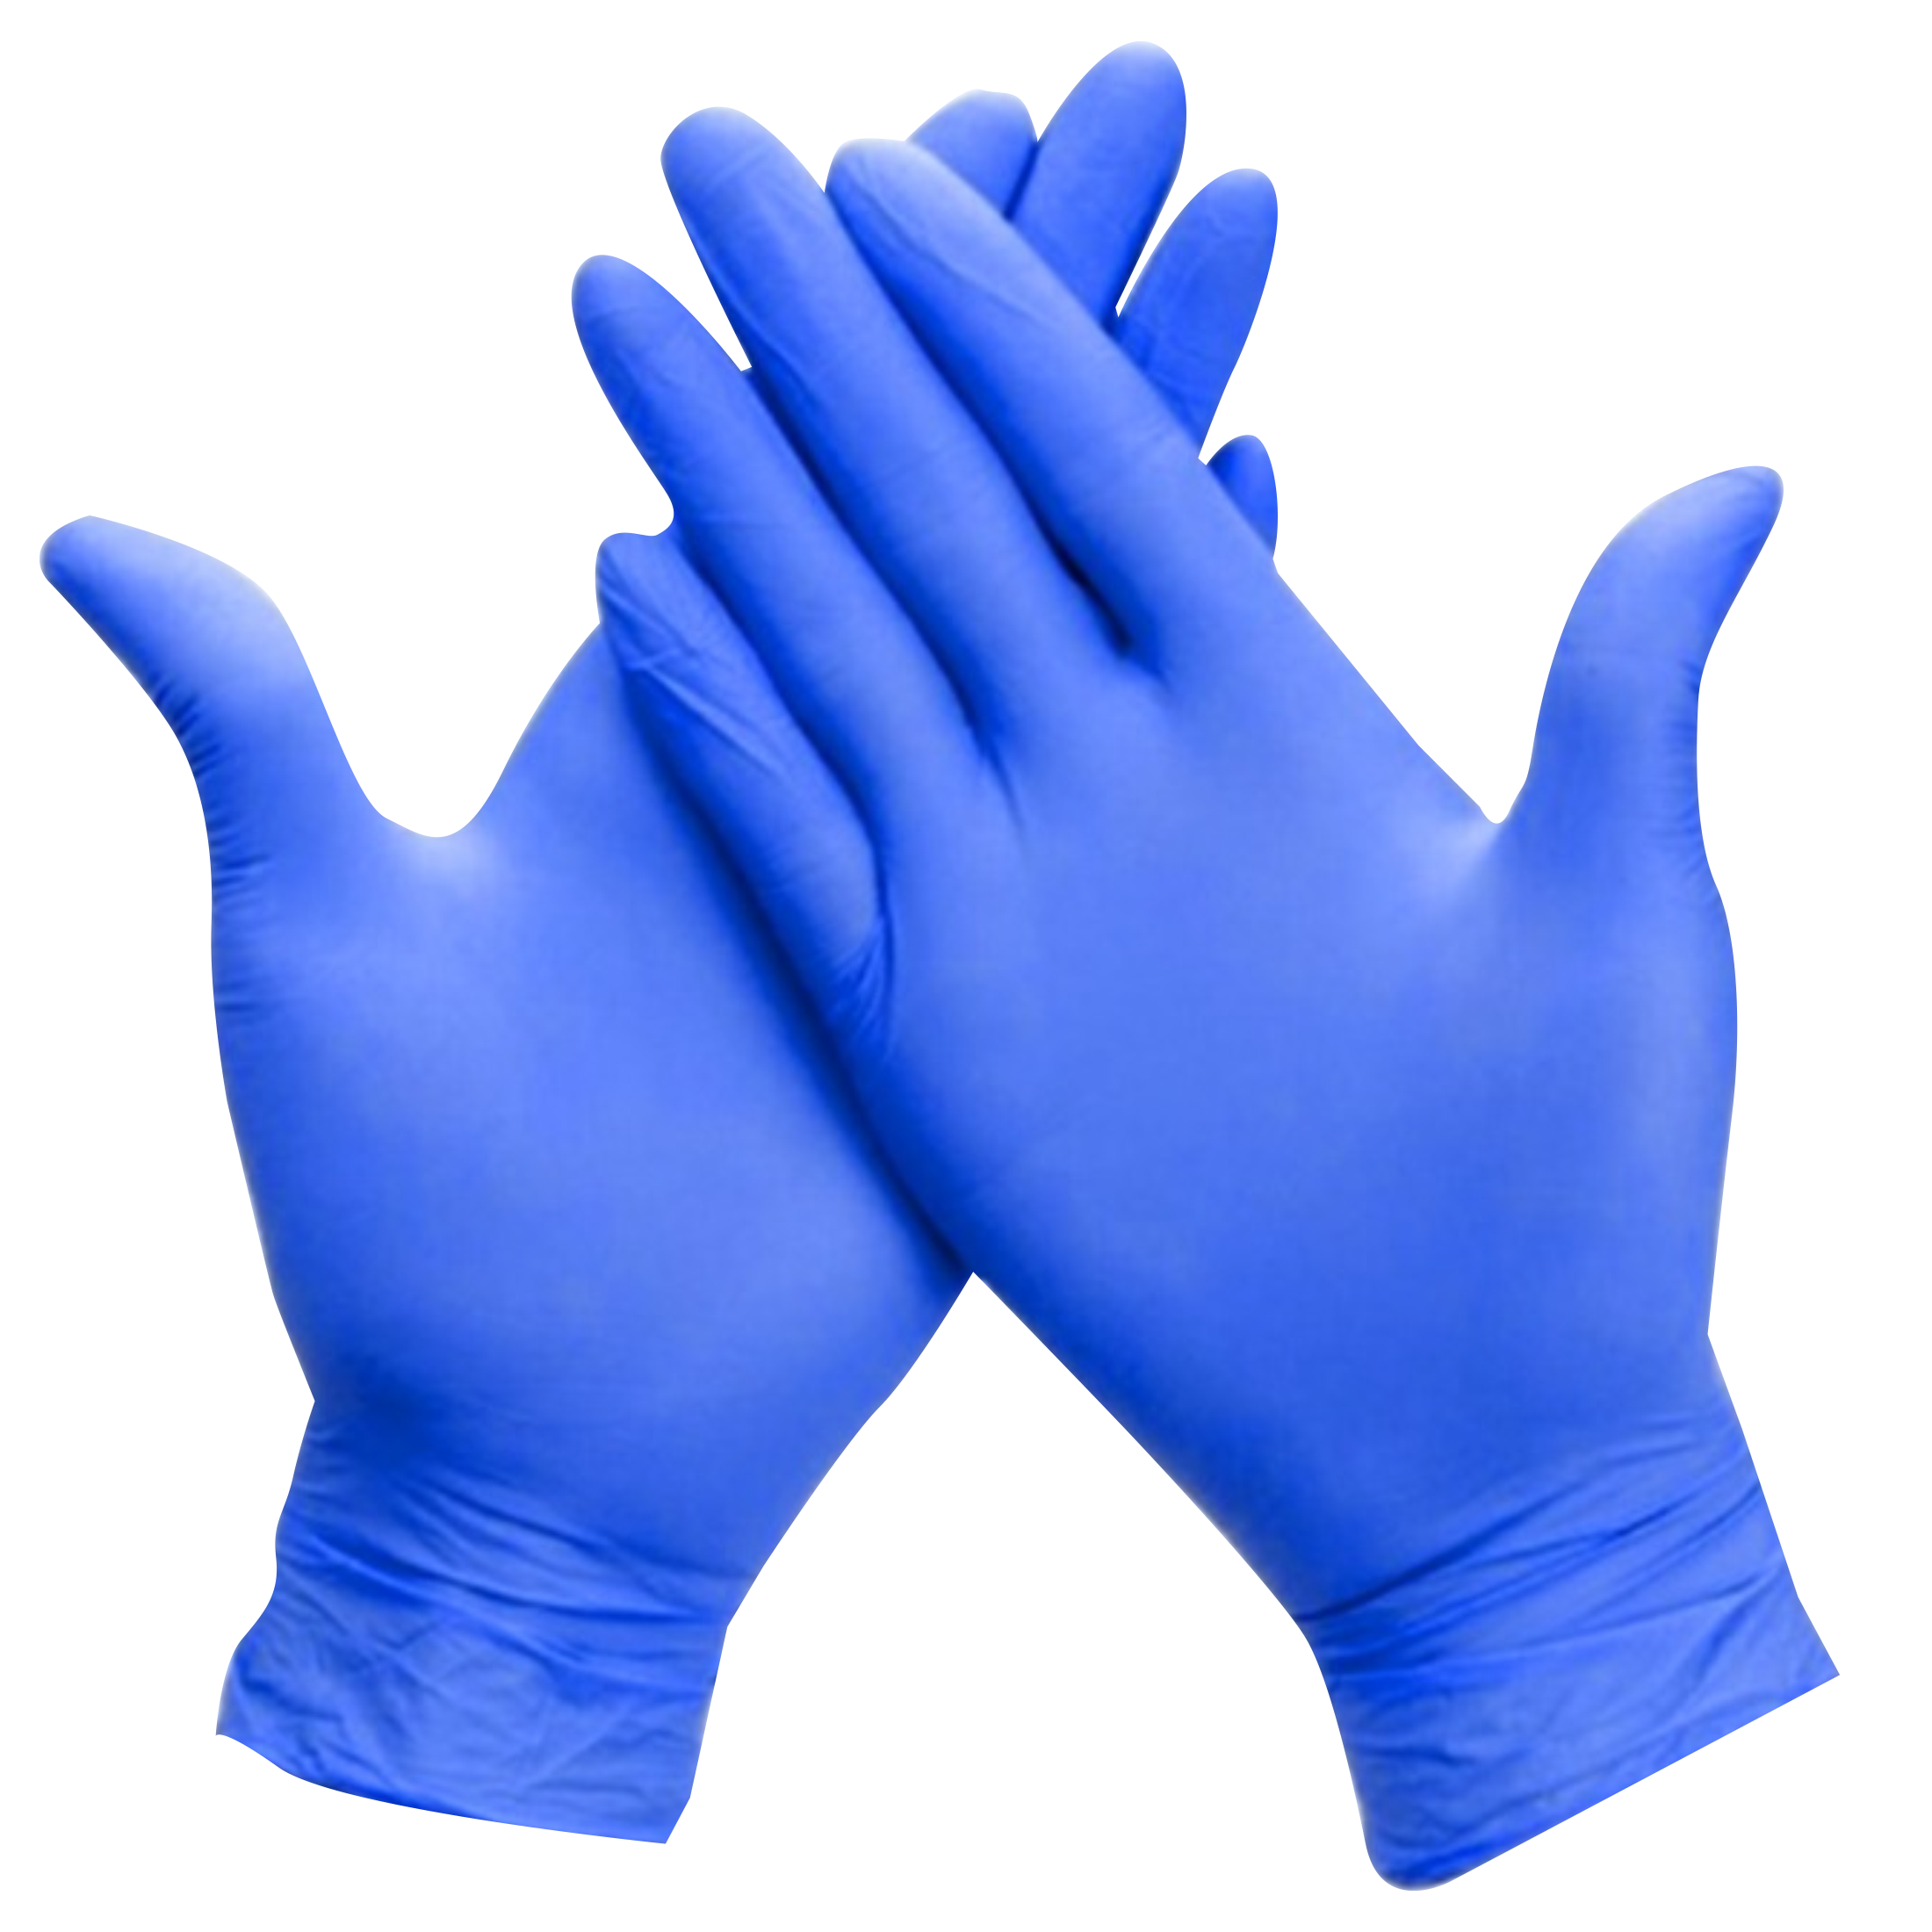 PPE, PPE Nitrile Powder Free Examination Hand Gloves - 1 Box (70 Gloves : 35 Pairs)